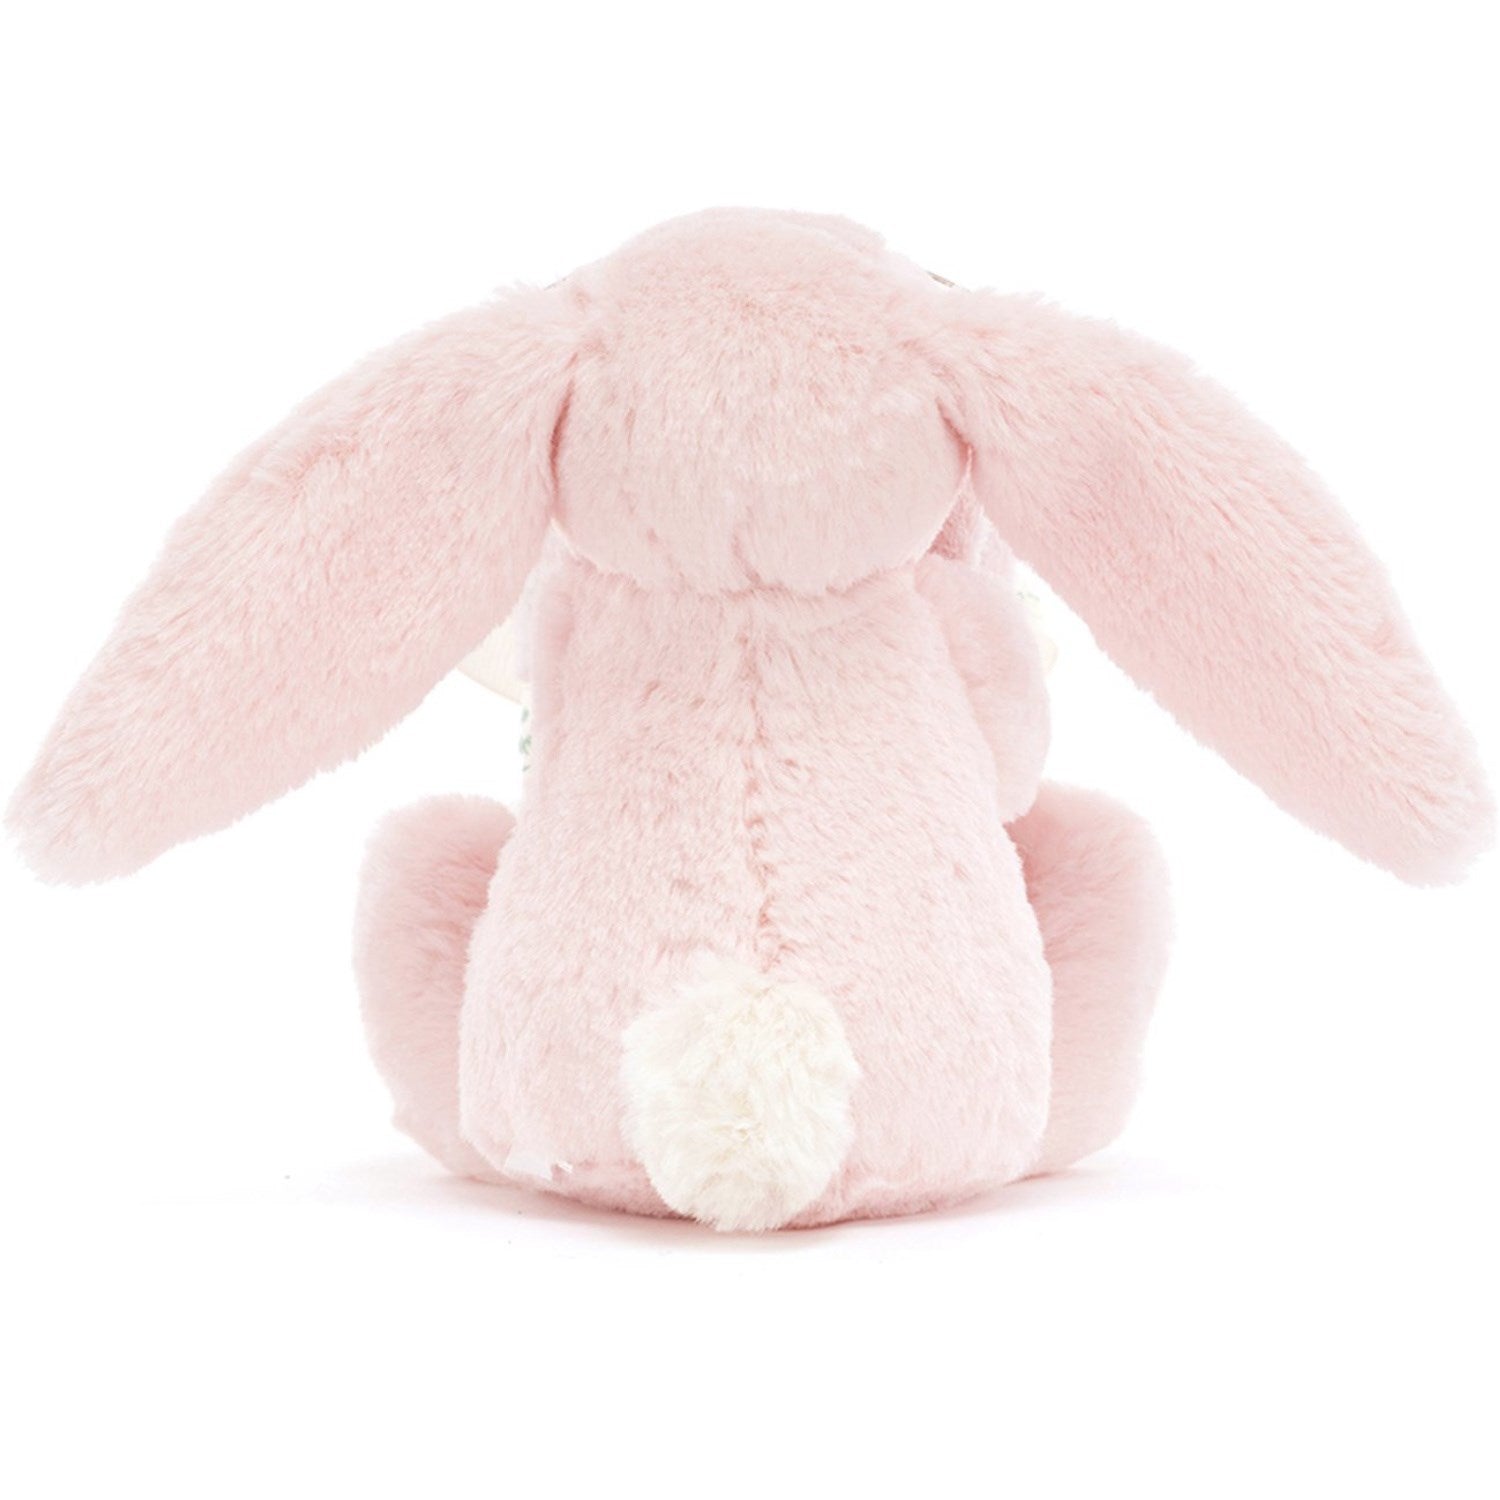   Bashful Pink Bunny Soother 4